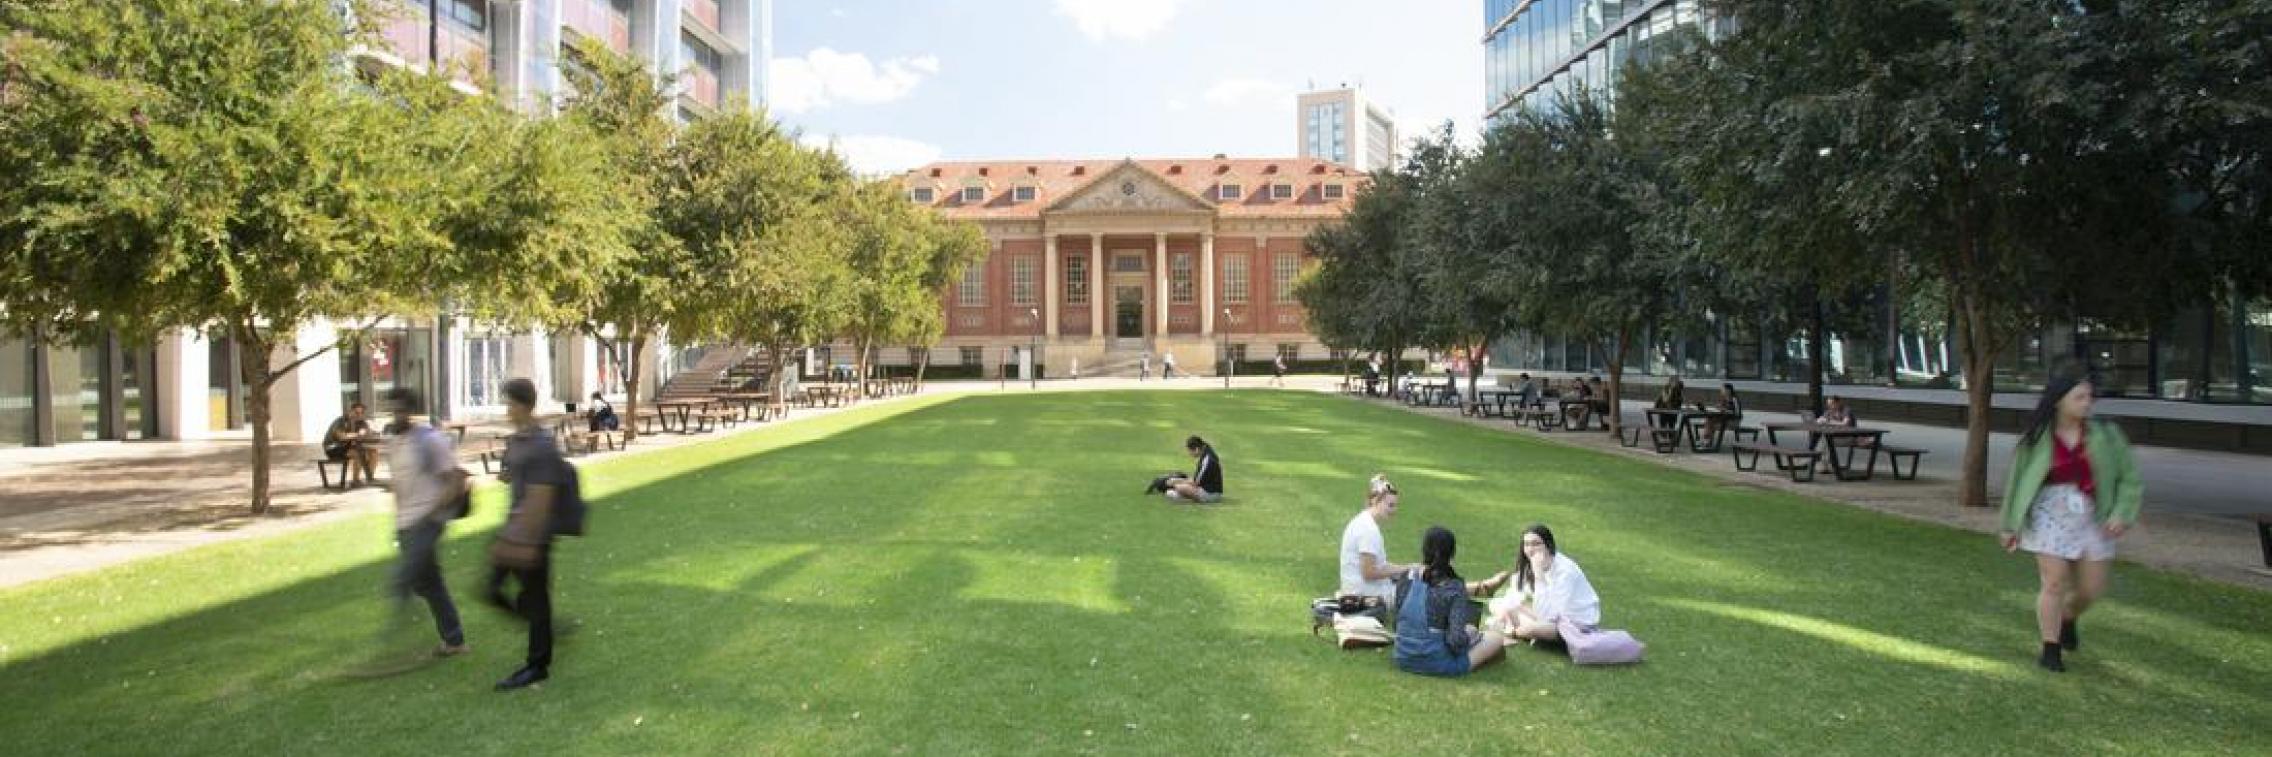 An image of the Barr Smith Library at the University of Adelaide, with students in the foreground.